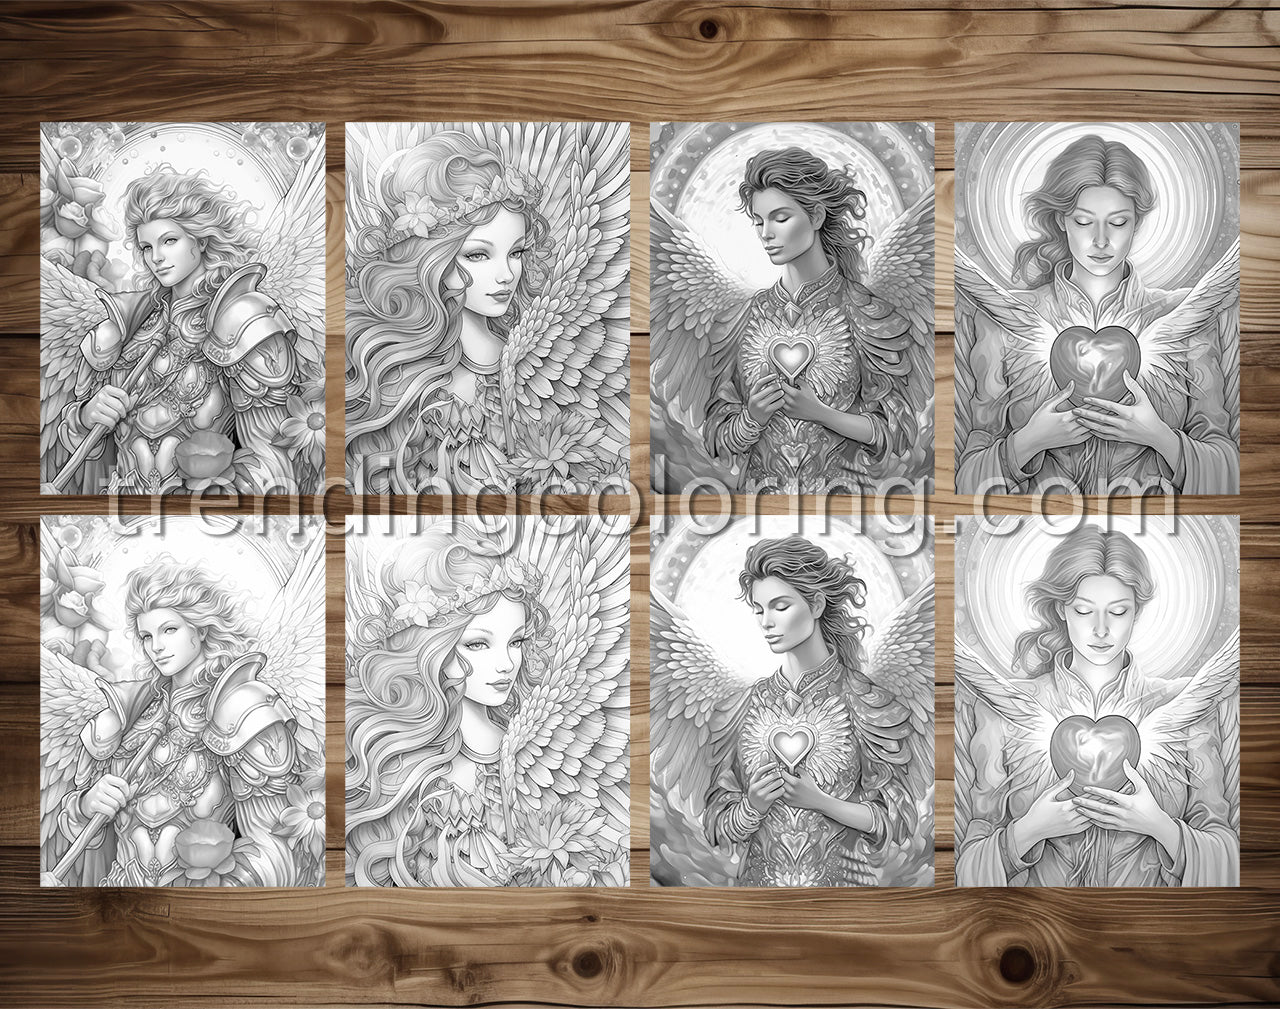 25 Archangels of God Grayscale Coloring Pages - Instant Download - Printable PDF